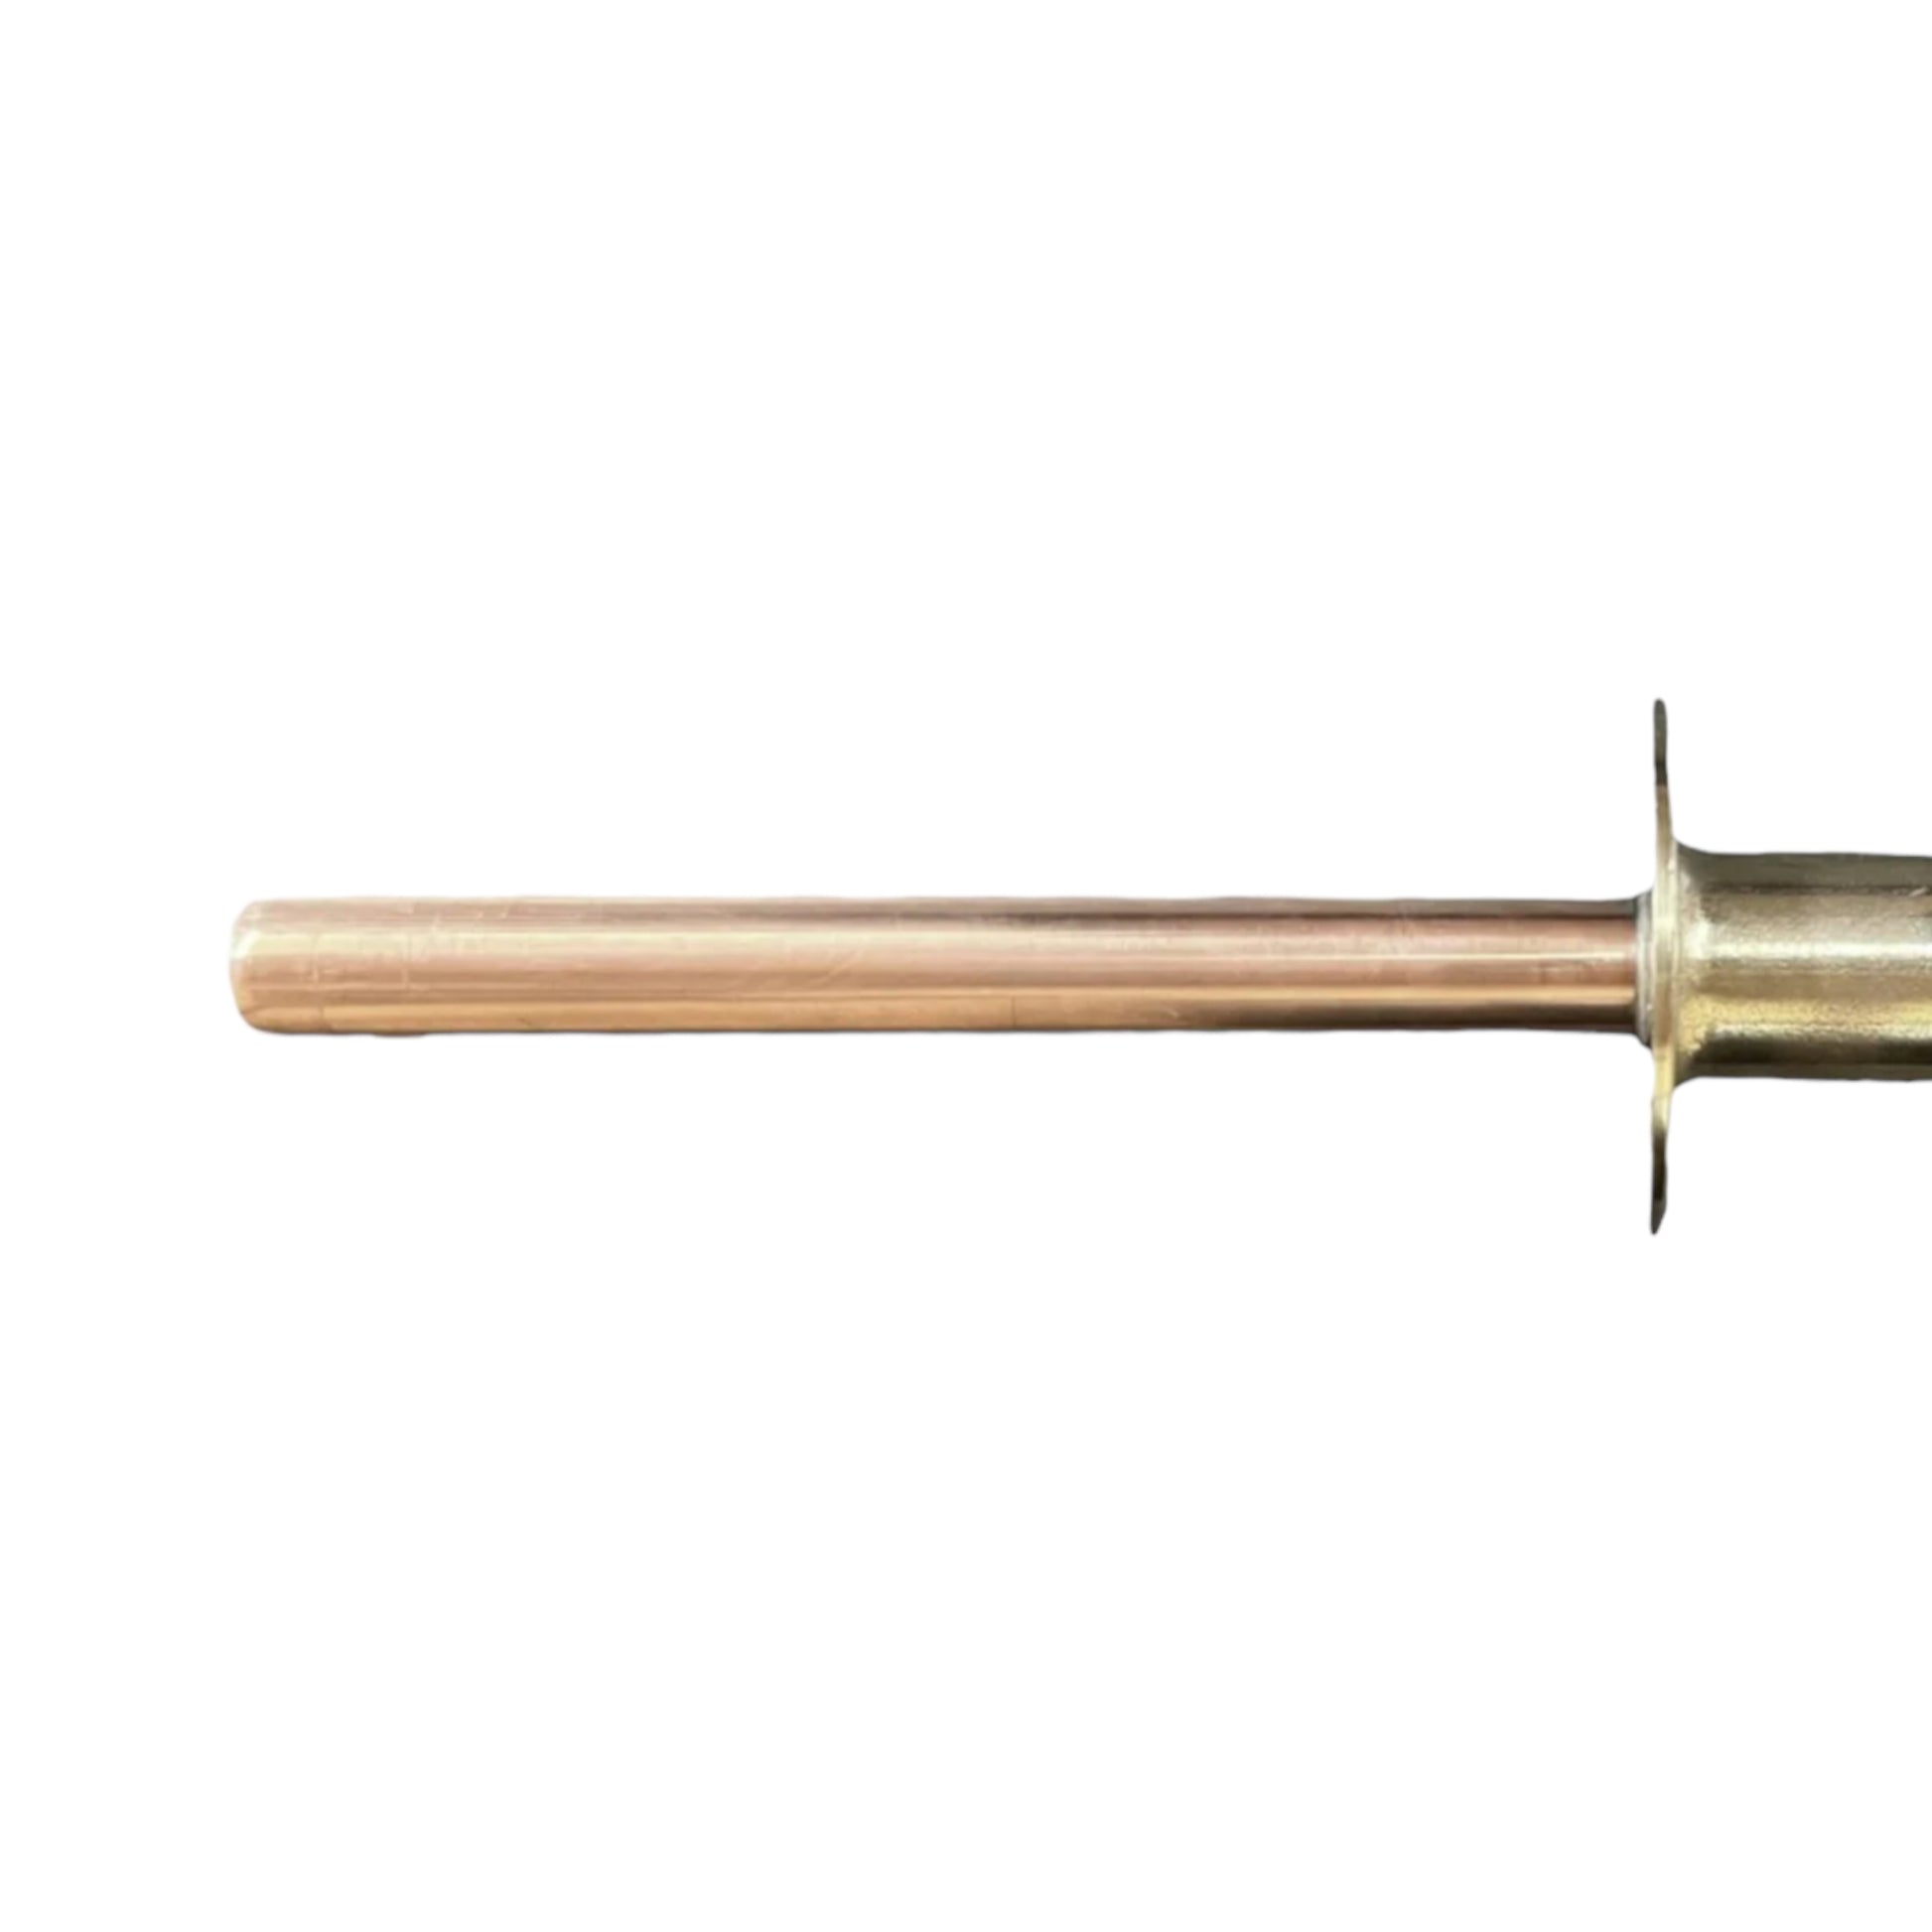 Copper and brass wall mounted kitchen or bathroom tap with 15mm tail ends sold by All Things French Store